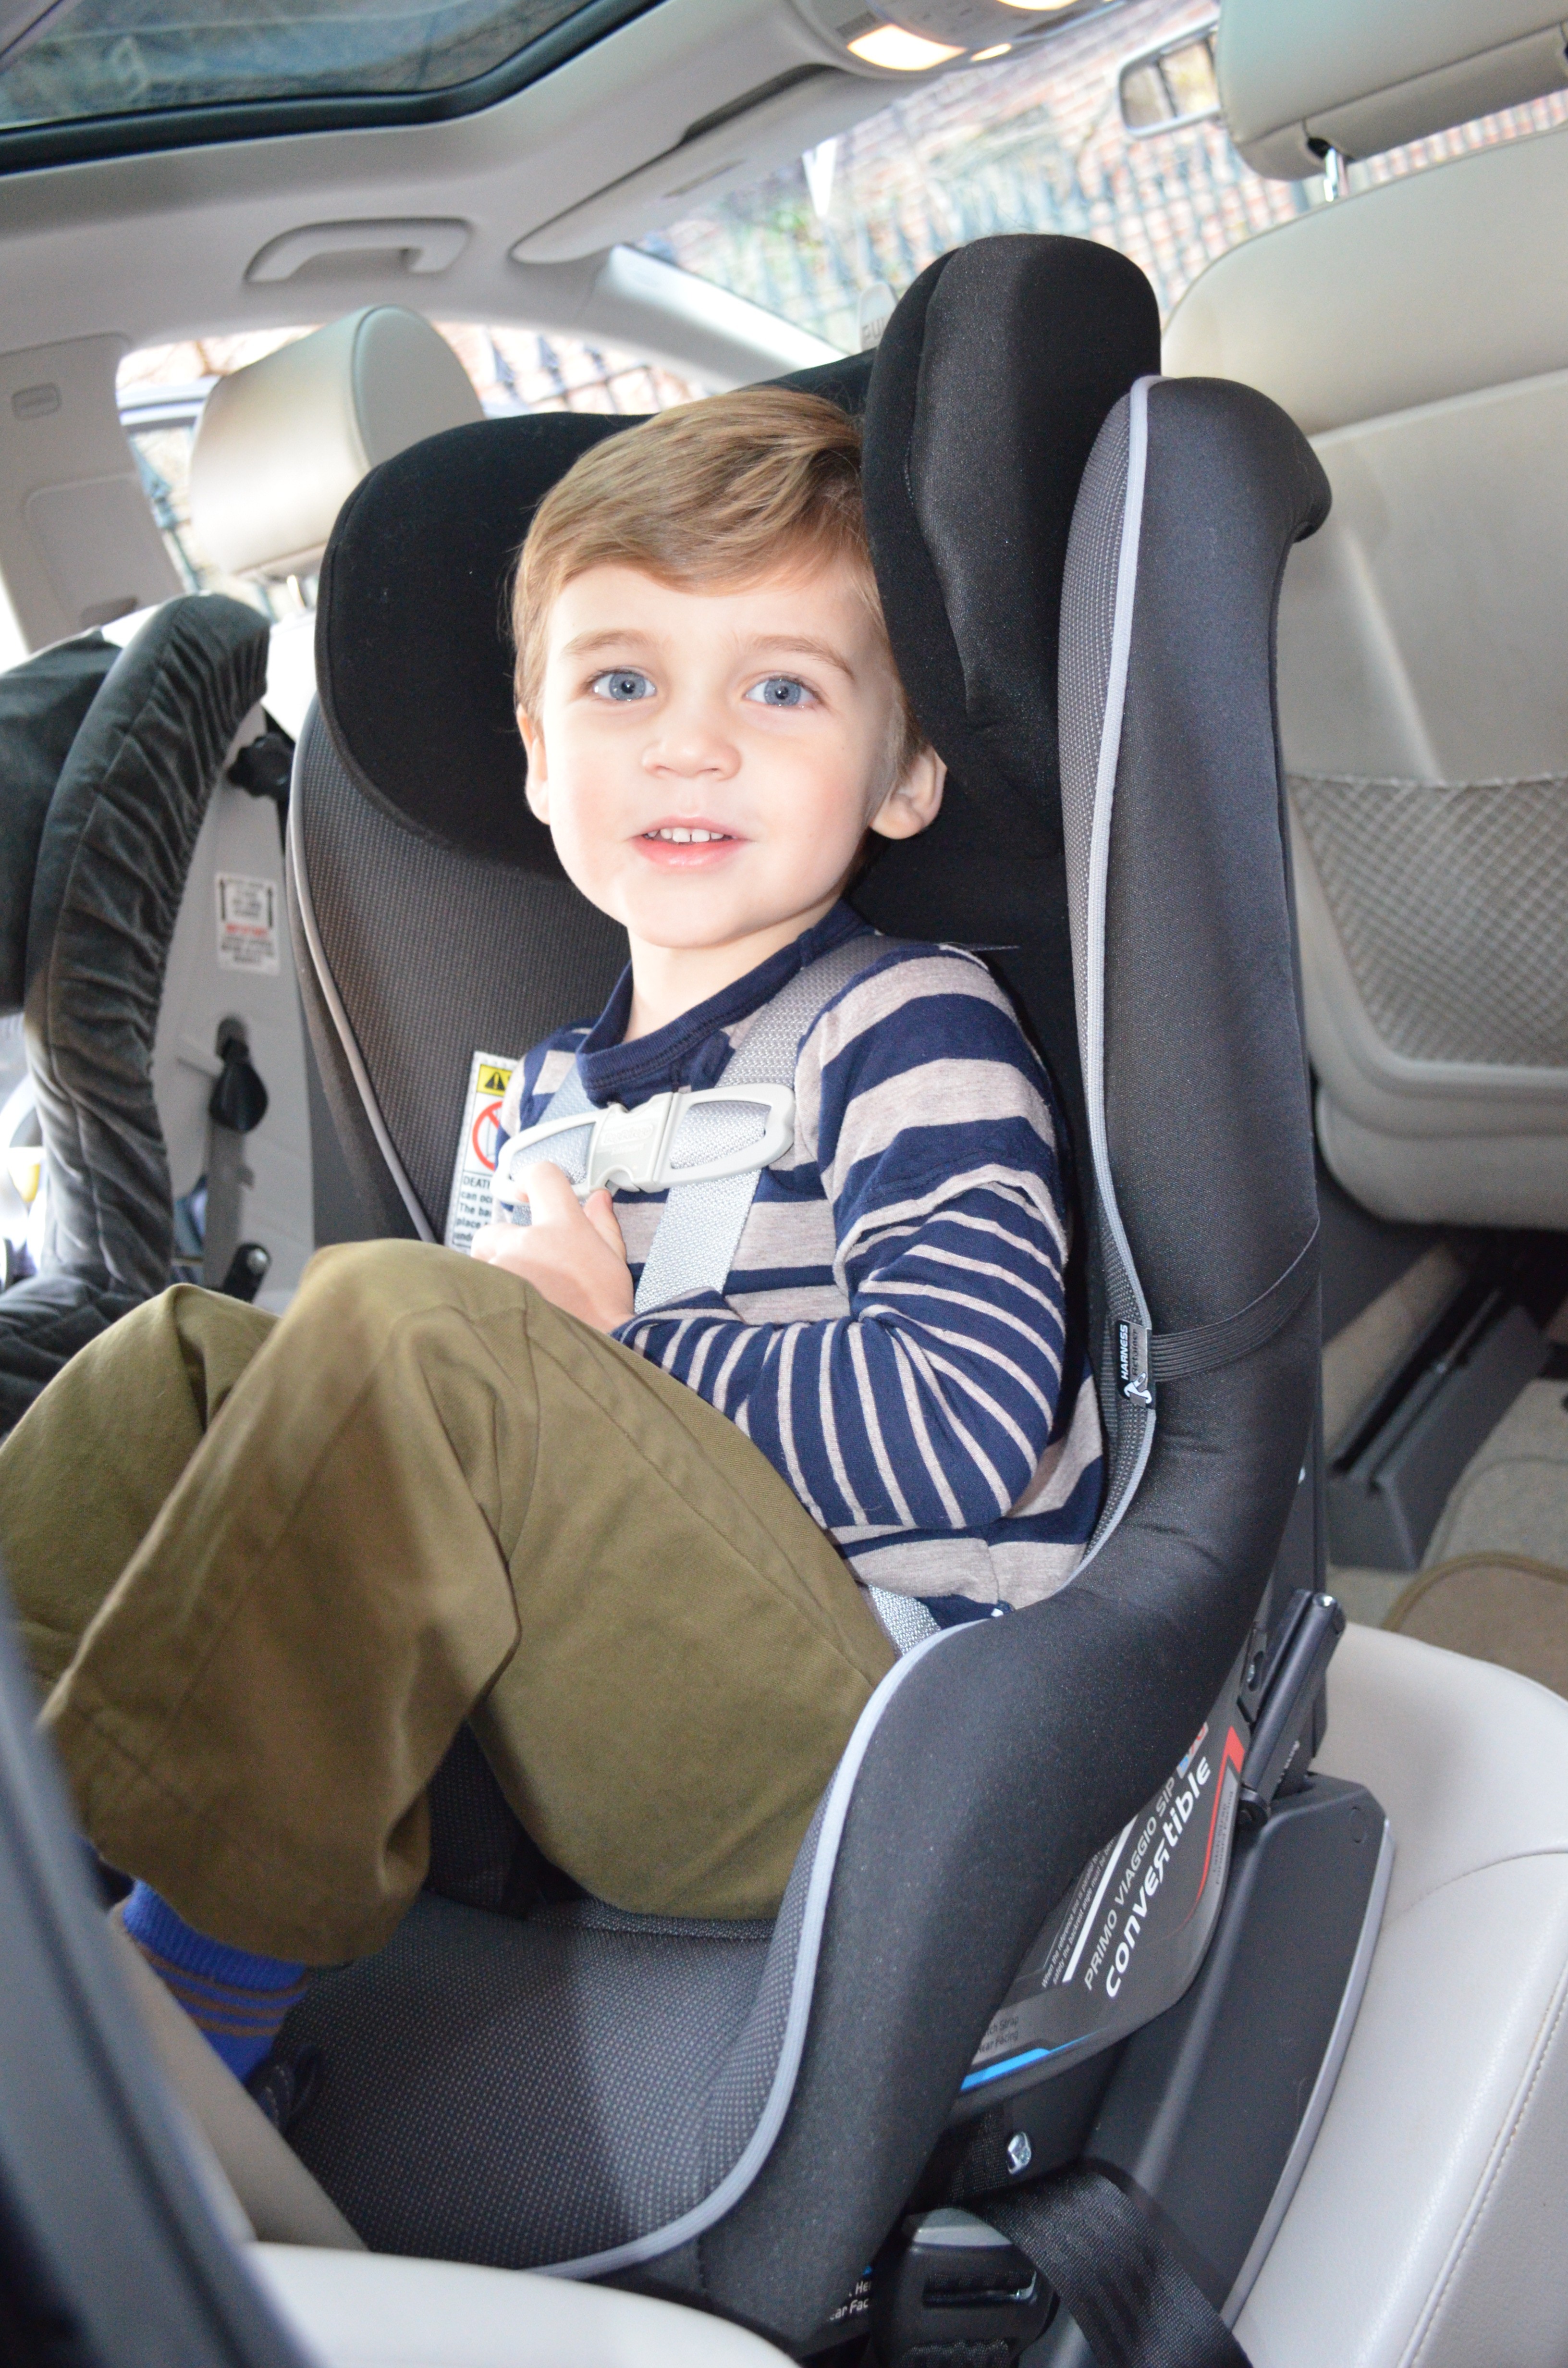 Your Child Turn Forward Facing, When Should I Change Car Seat To Forward Facing